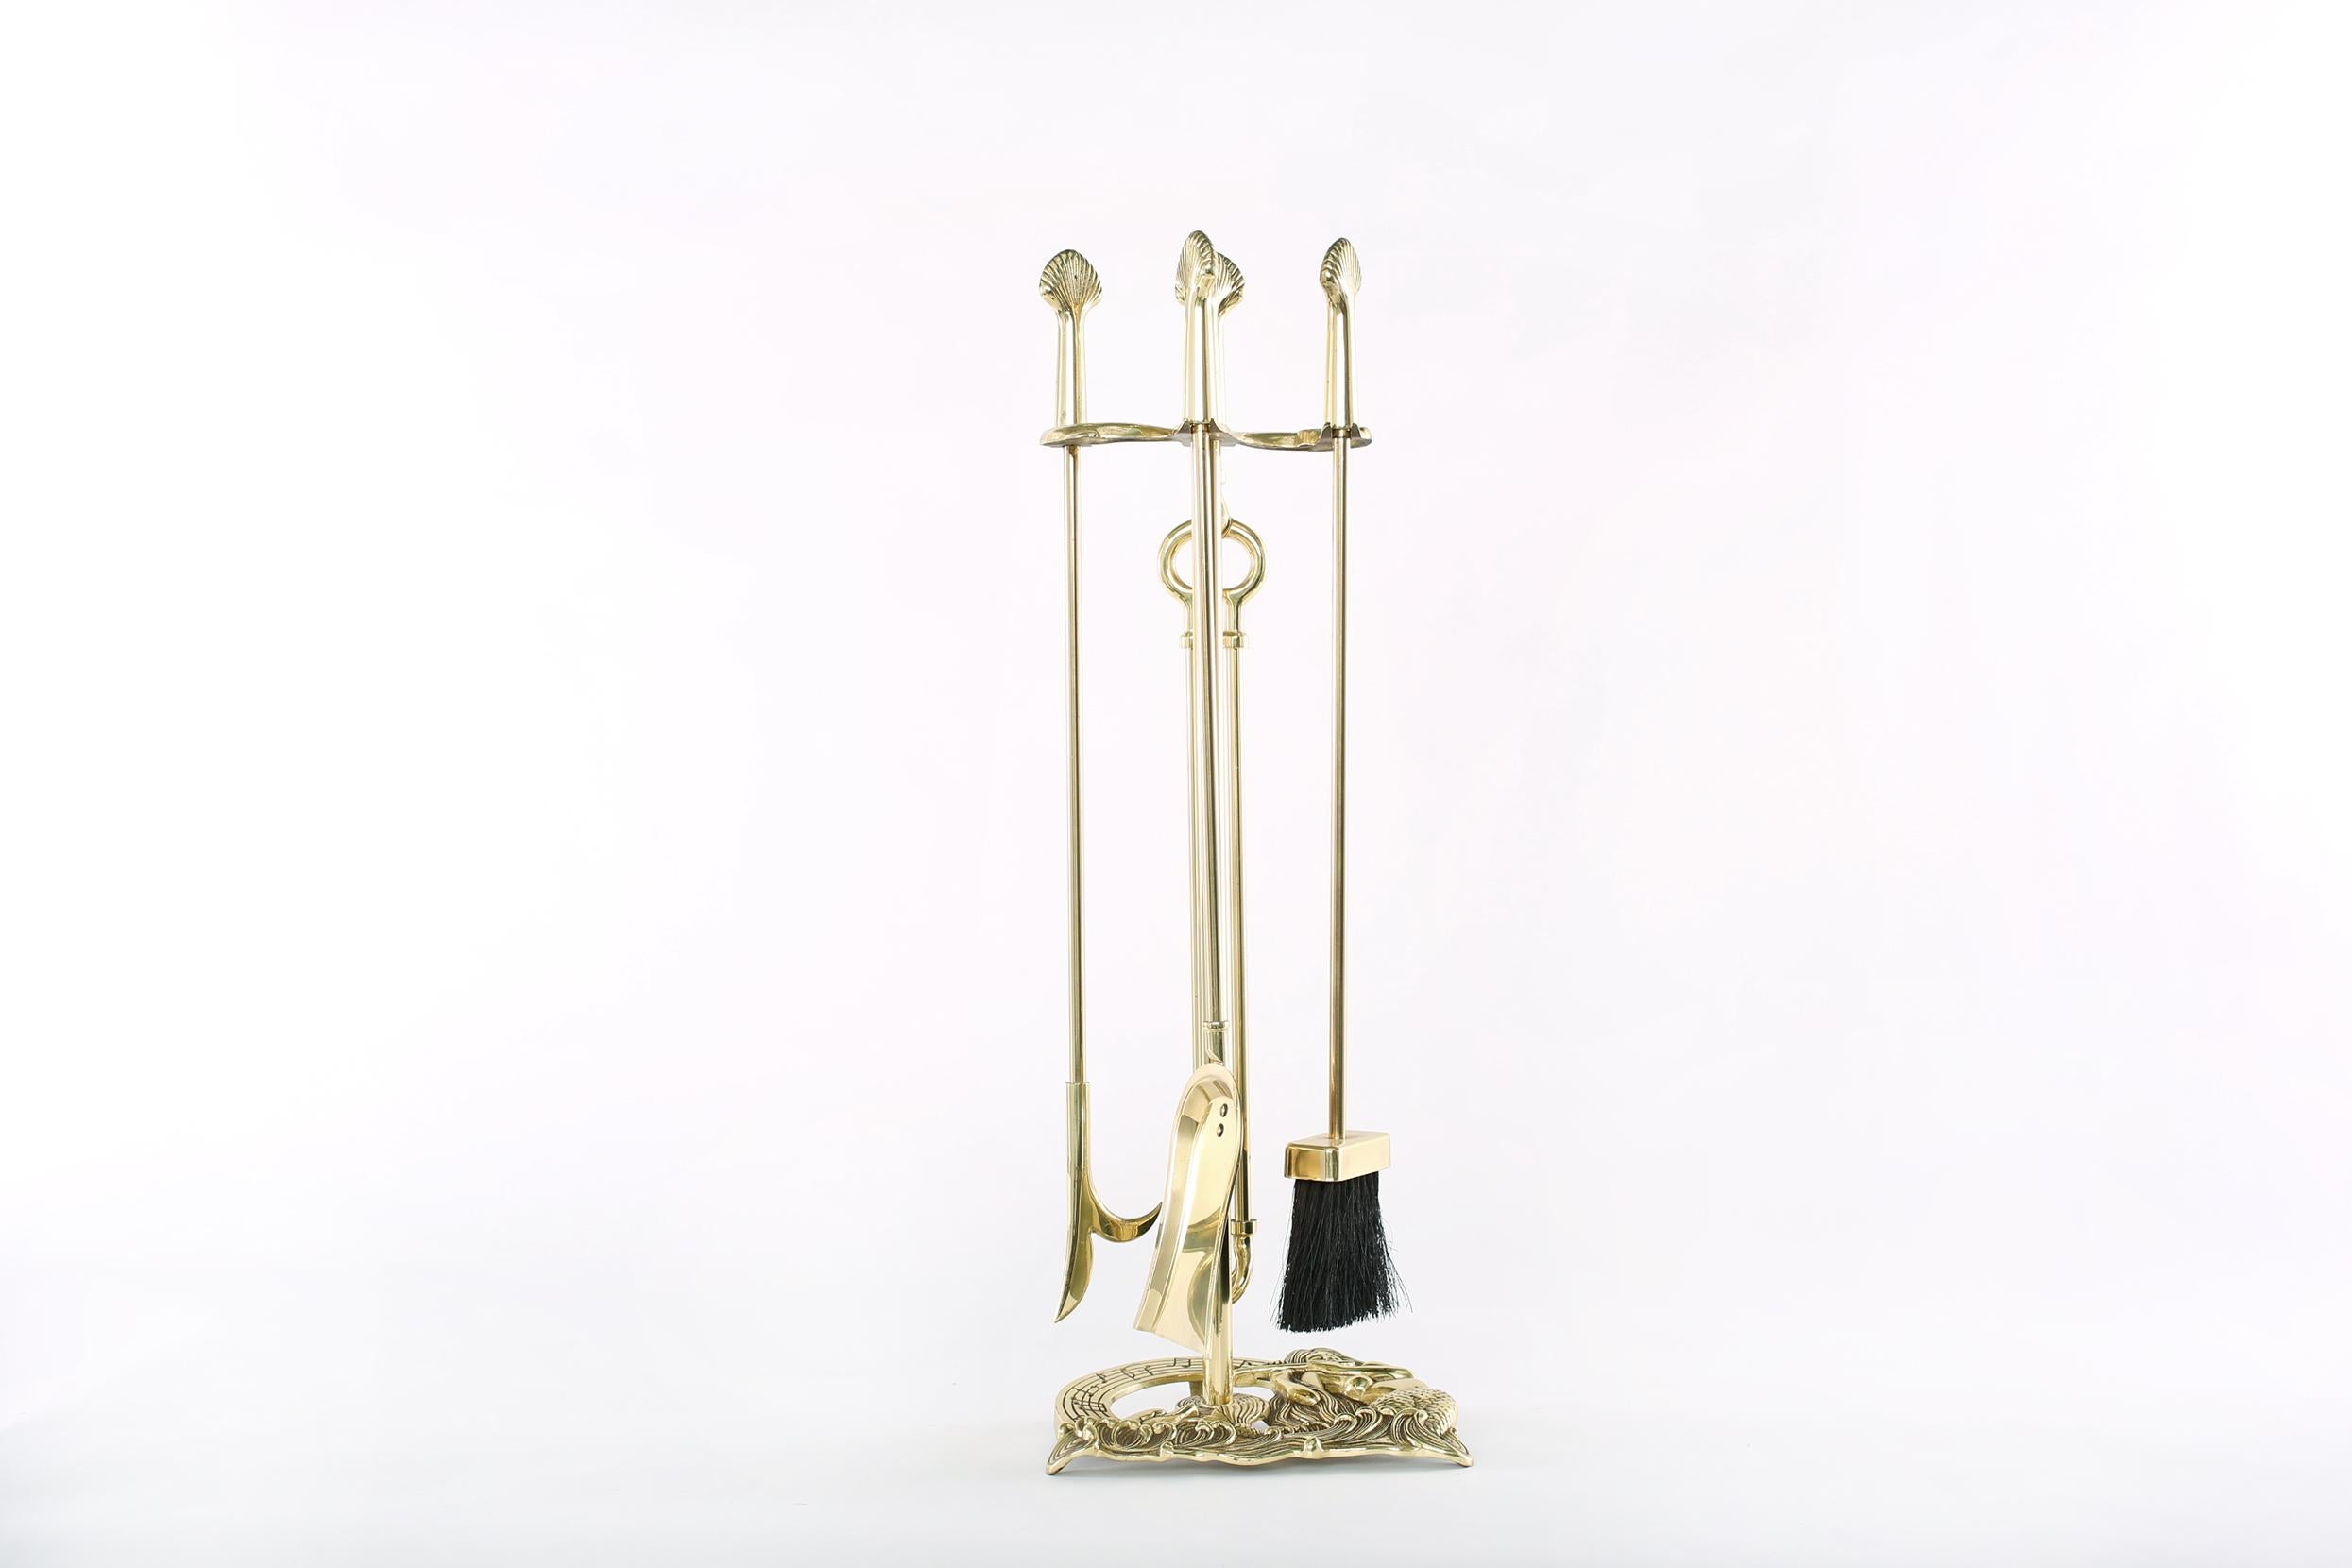 20th century five piece solid brass fire place tools accessories with exterior design details. Set Include, poker, broom, tongs, shovel & tool set. The fire tool stand about 30 inches tall. Base 10 inches x 7 inches.

 